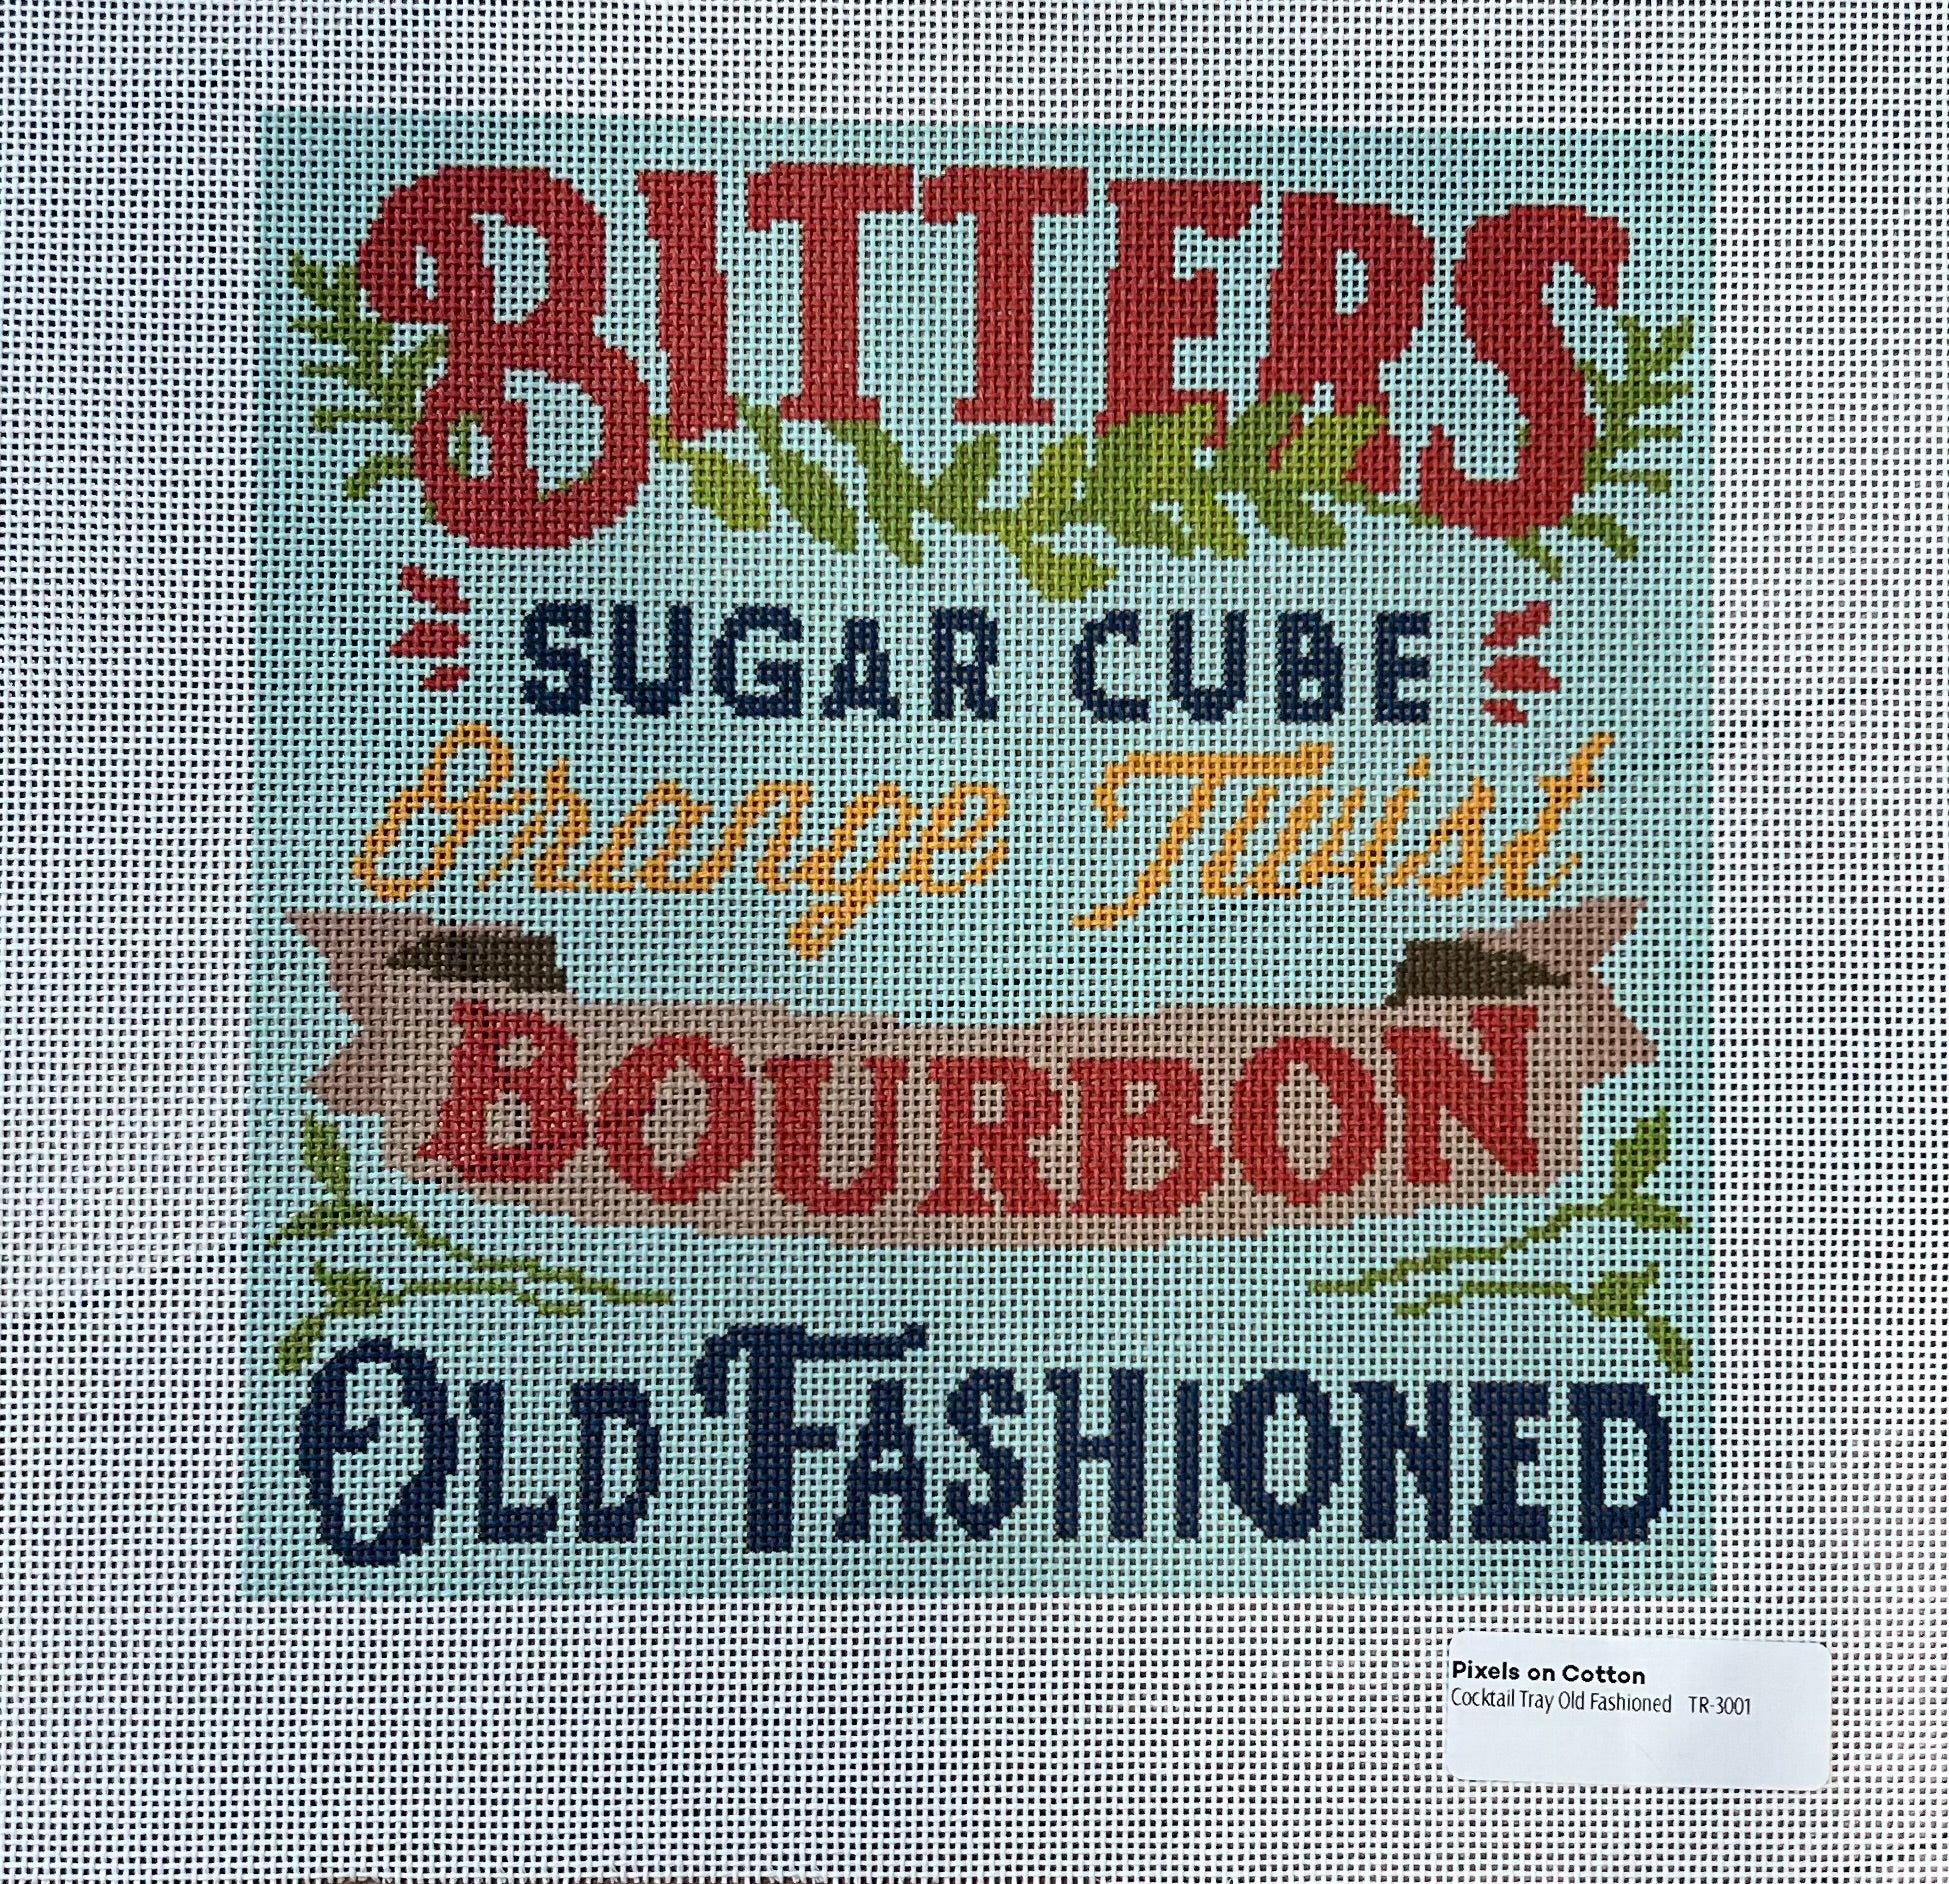 Signs and Sayings by Pixels on Cotton